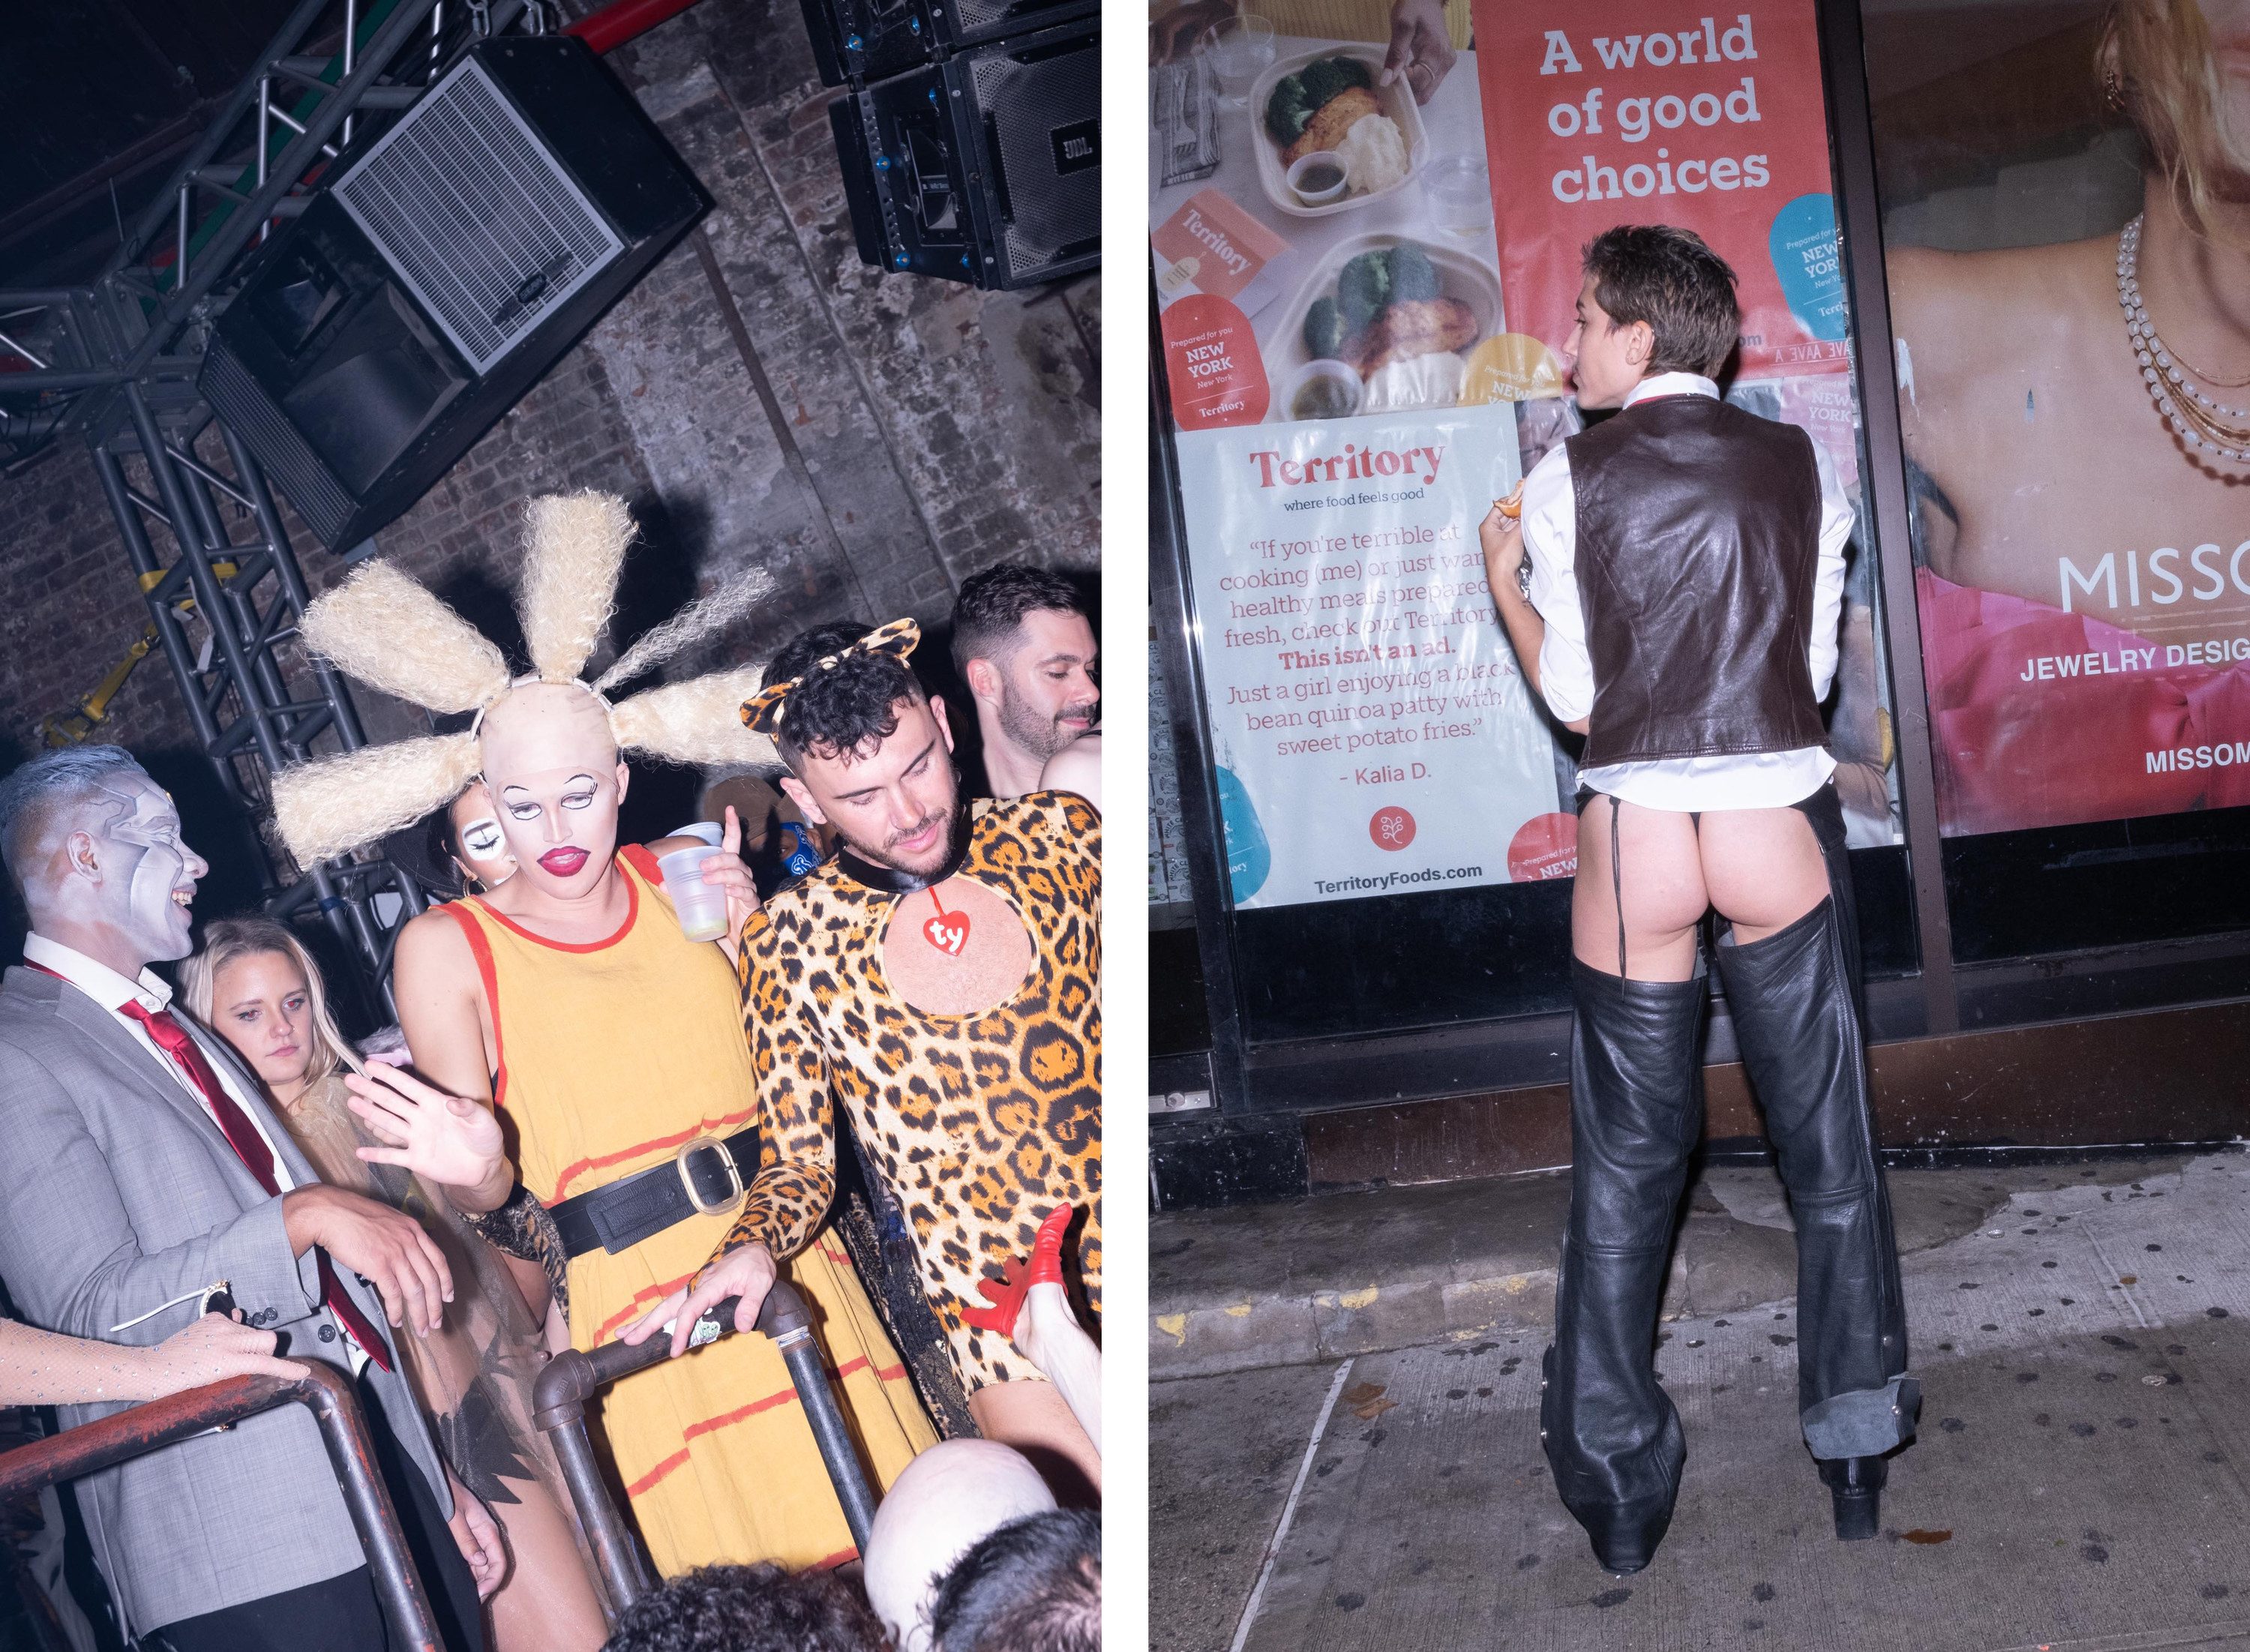 Left a group of people in wild costumes, right a man with assless chaps on the street